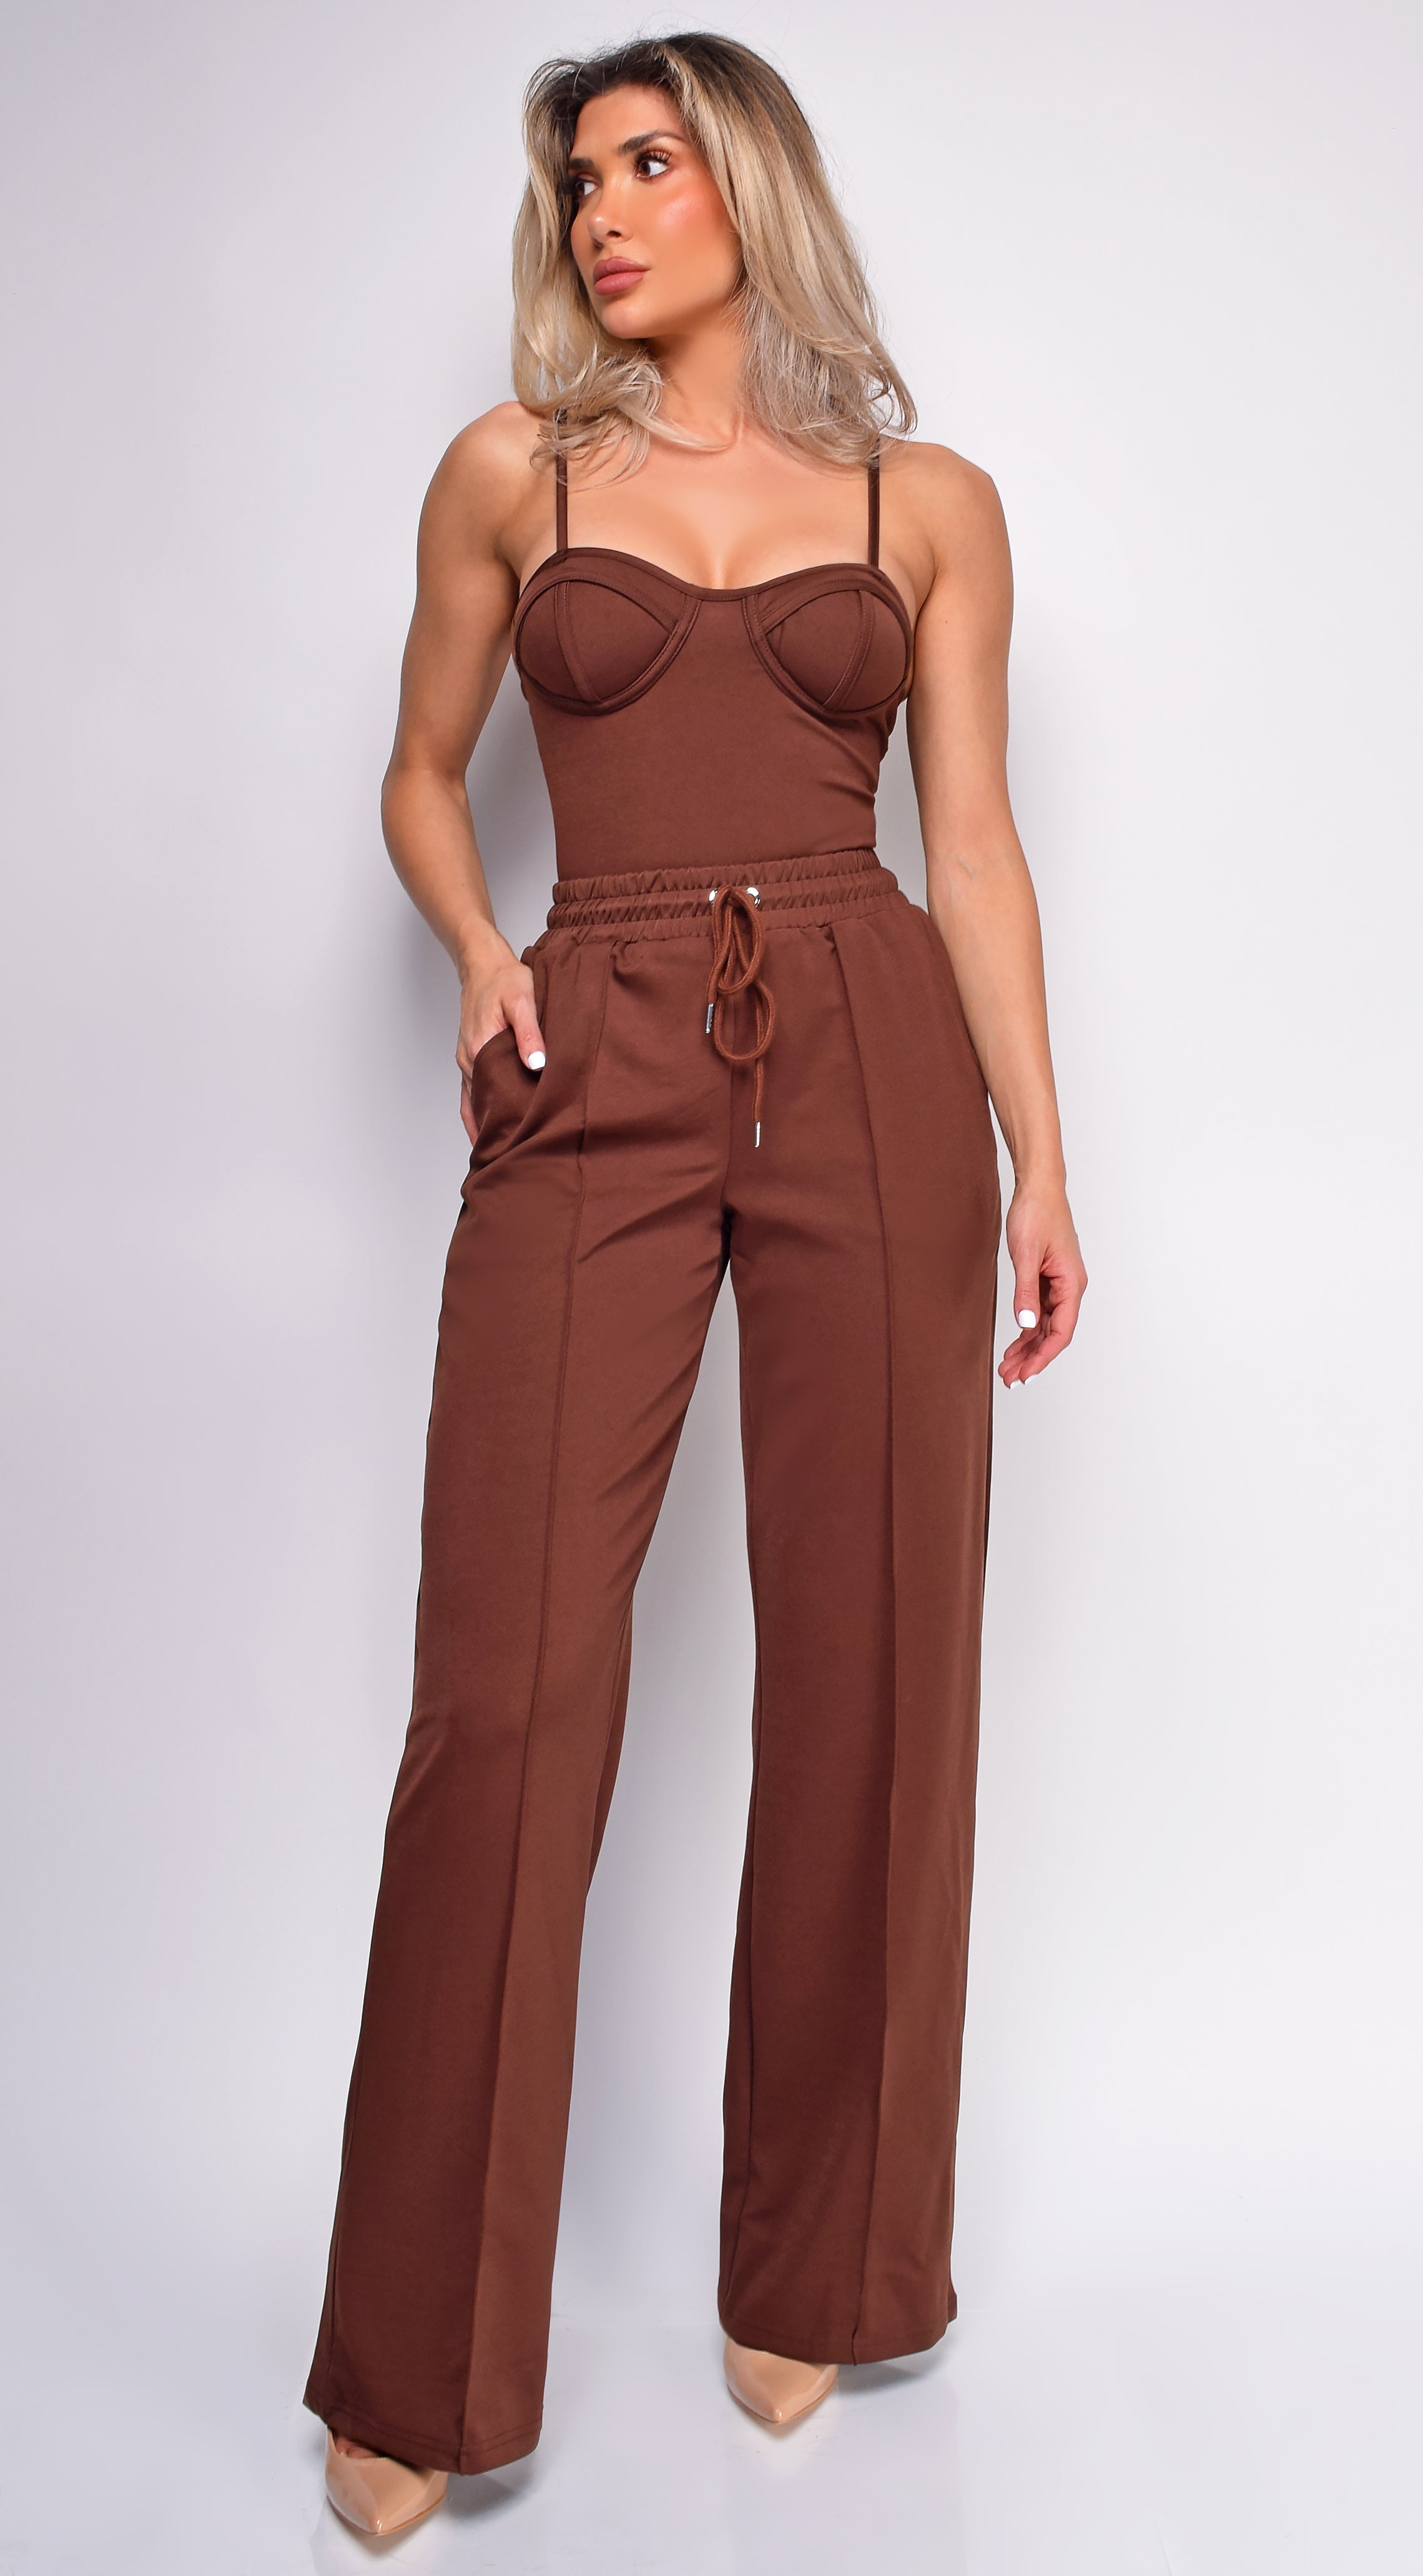 Madely Brown Bustier Wide Leg Pants Set